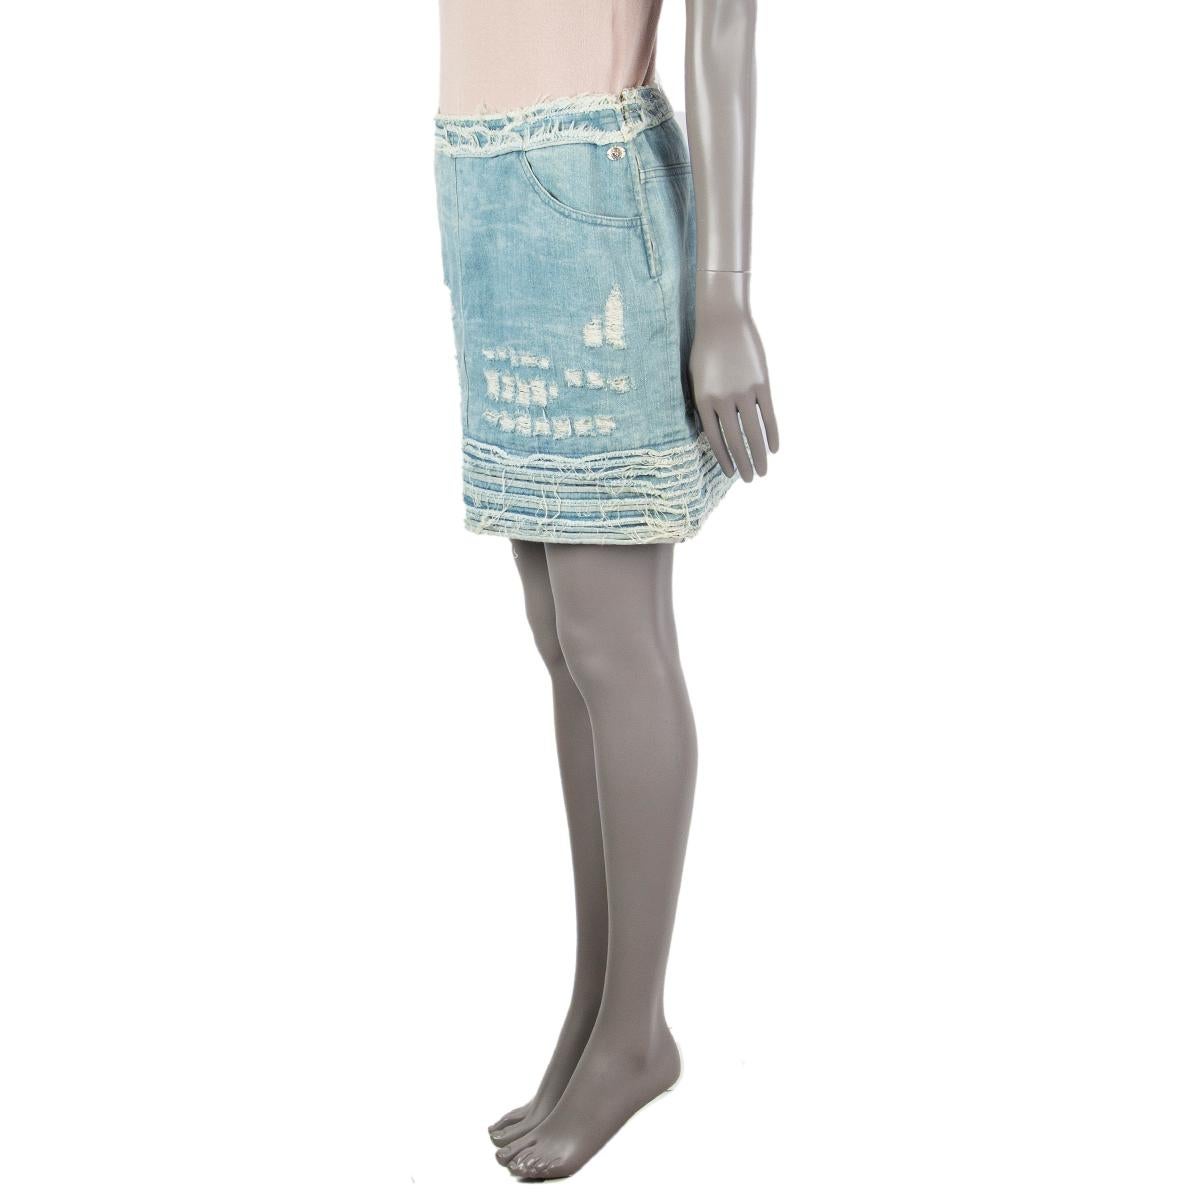 Chanel distressed denim skirt in washed denim cotton (92%) elastane (3%) viscose (3%) polyester (2%) with a straight cut, two pockets and a coin-pocket in the front, trimmed seams and on the left side a small plate stitched on with a lion head.